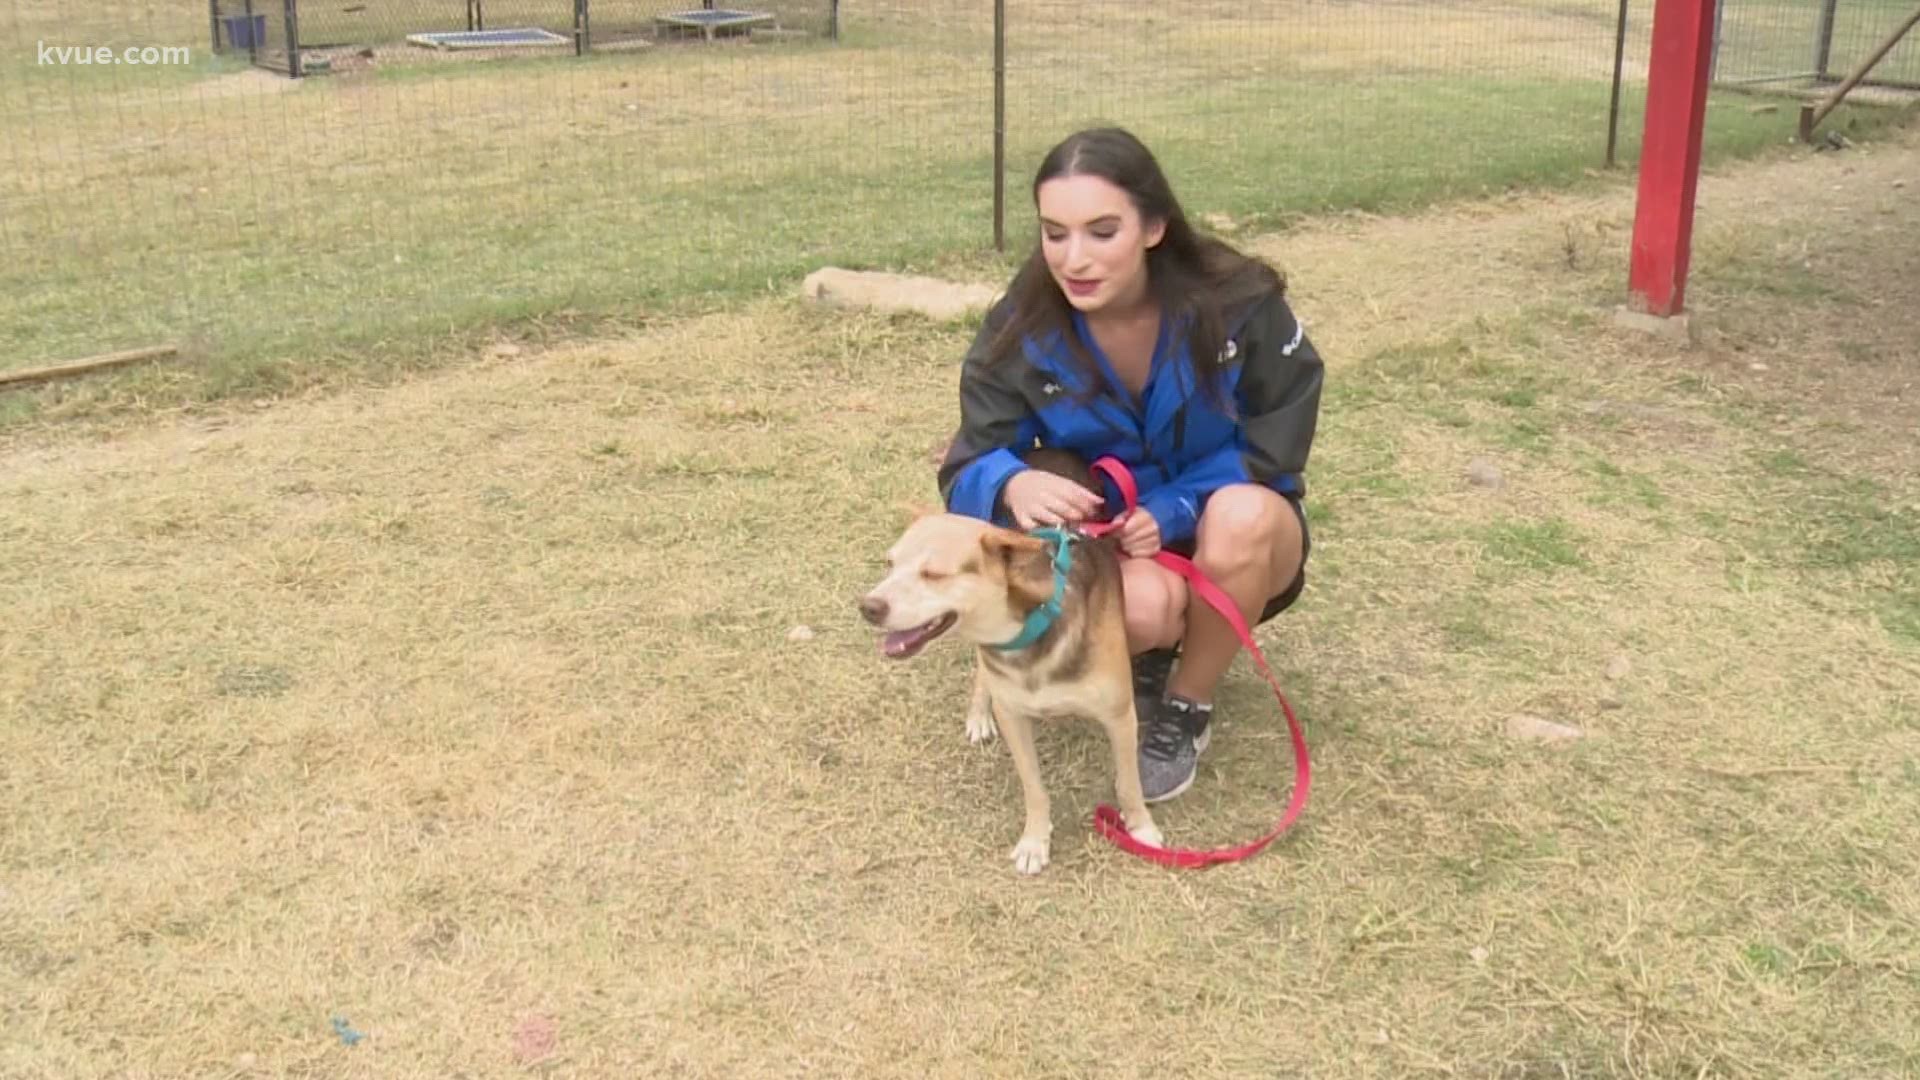 KVUE's Pet of the Week is Connor! Connor is a 5-year-old pup who loves to cuddle. He’s available for adoption at Texas Humane Heroes.